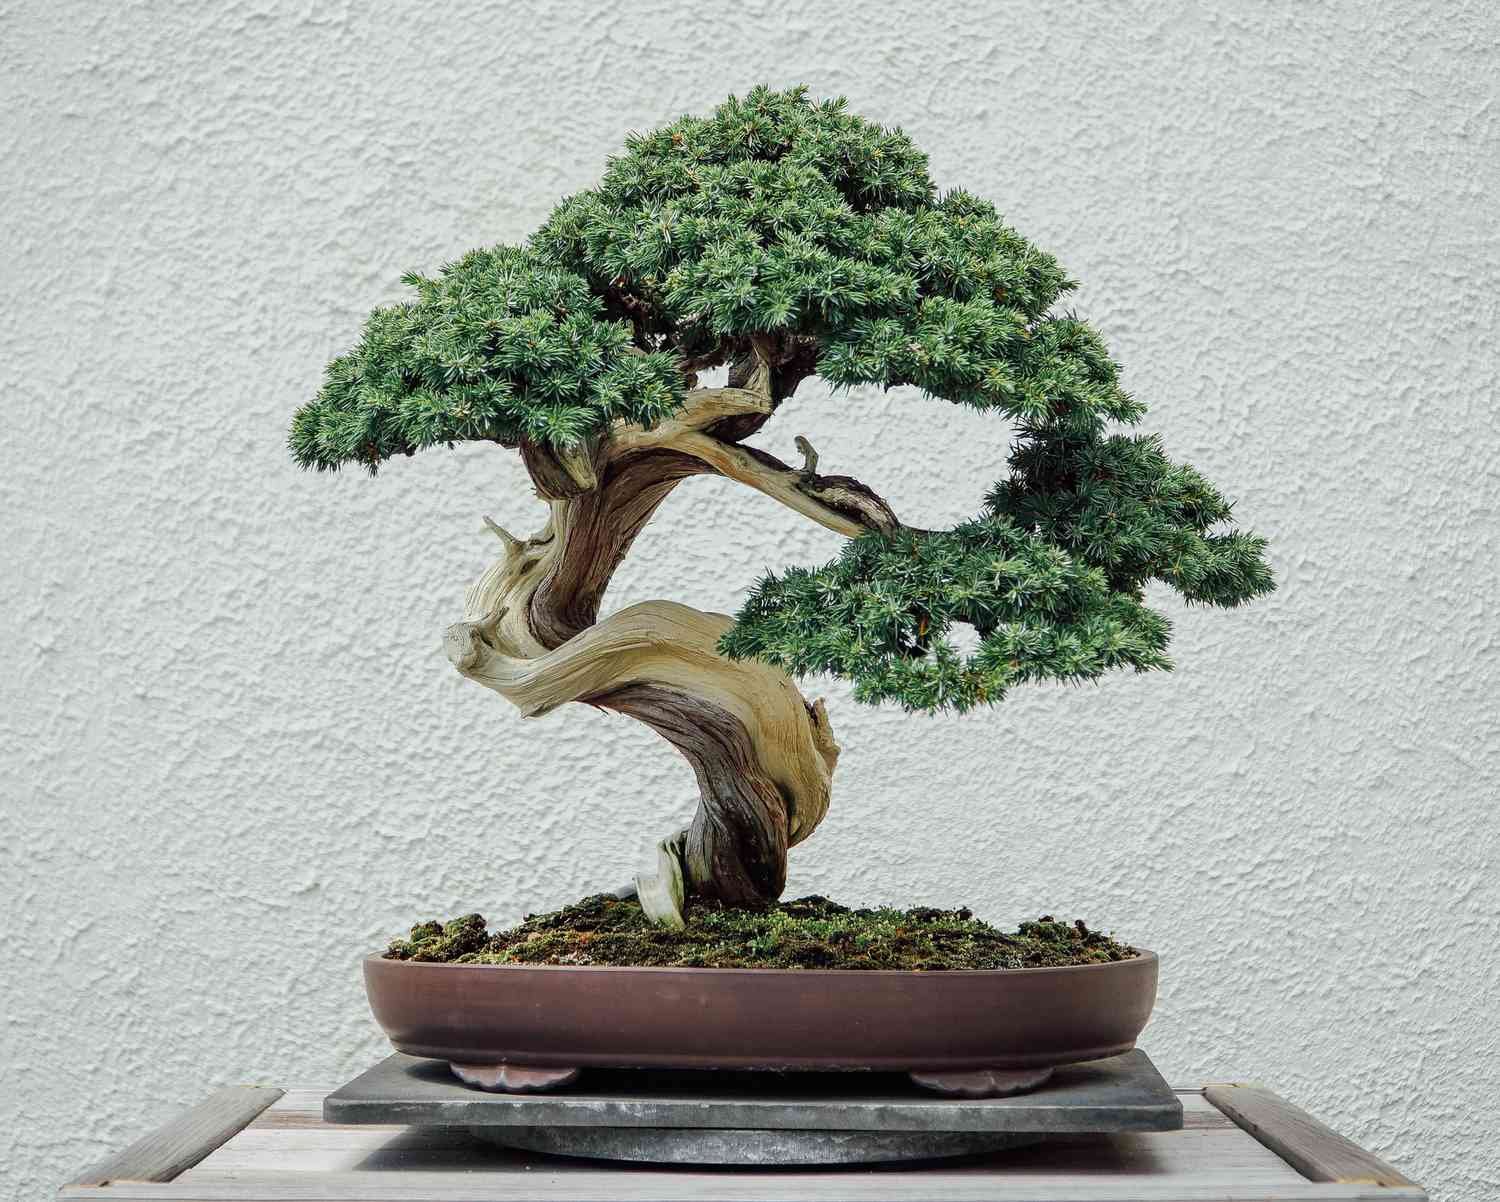 What Happens if you let a Bonsai Tree Grow?